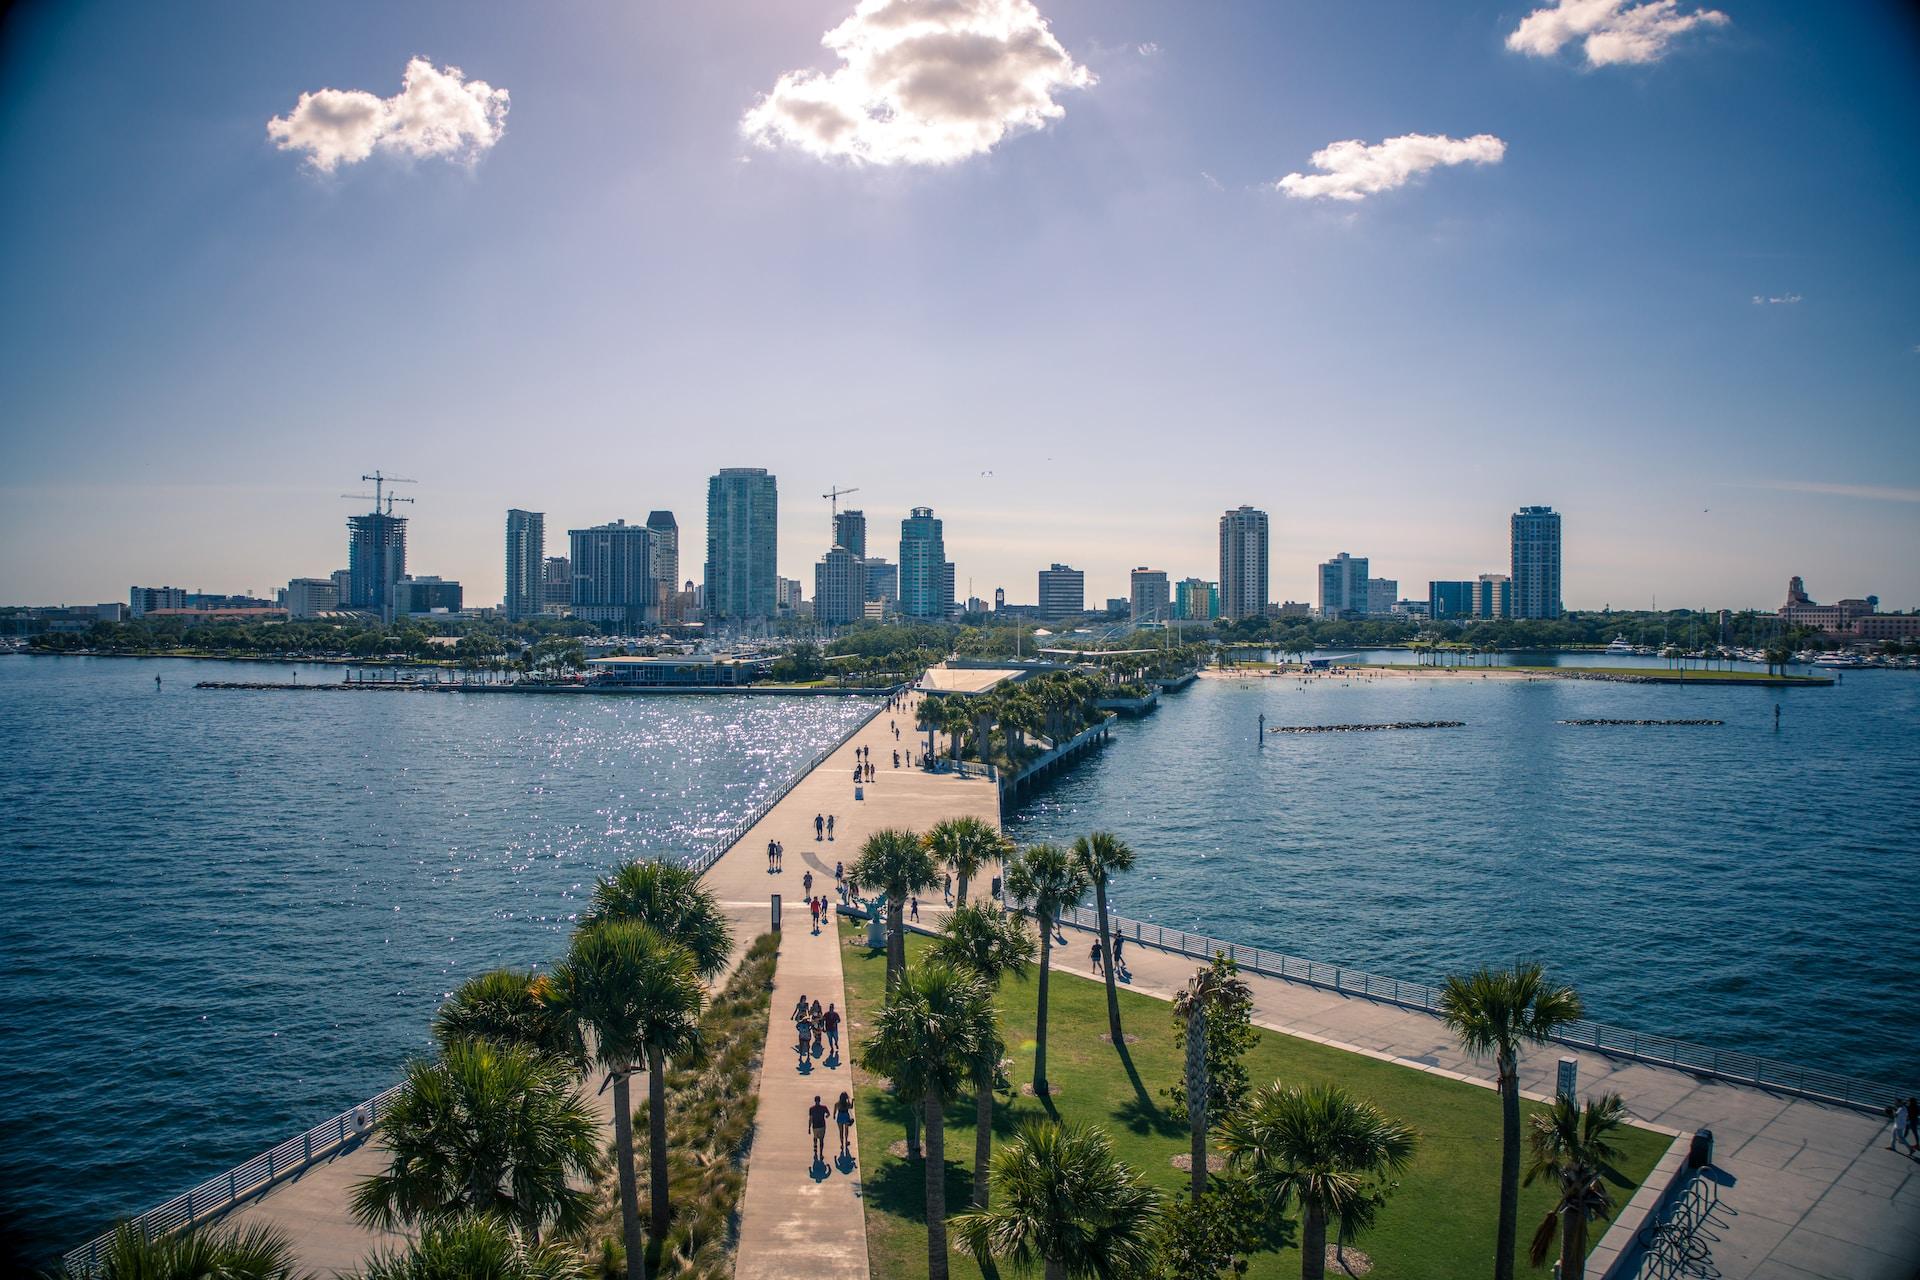 Skyline of St. Petersburg, Florida viewed from the pier